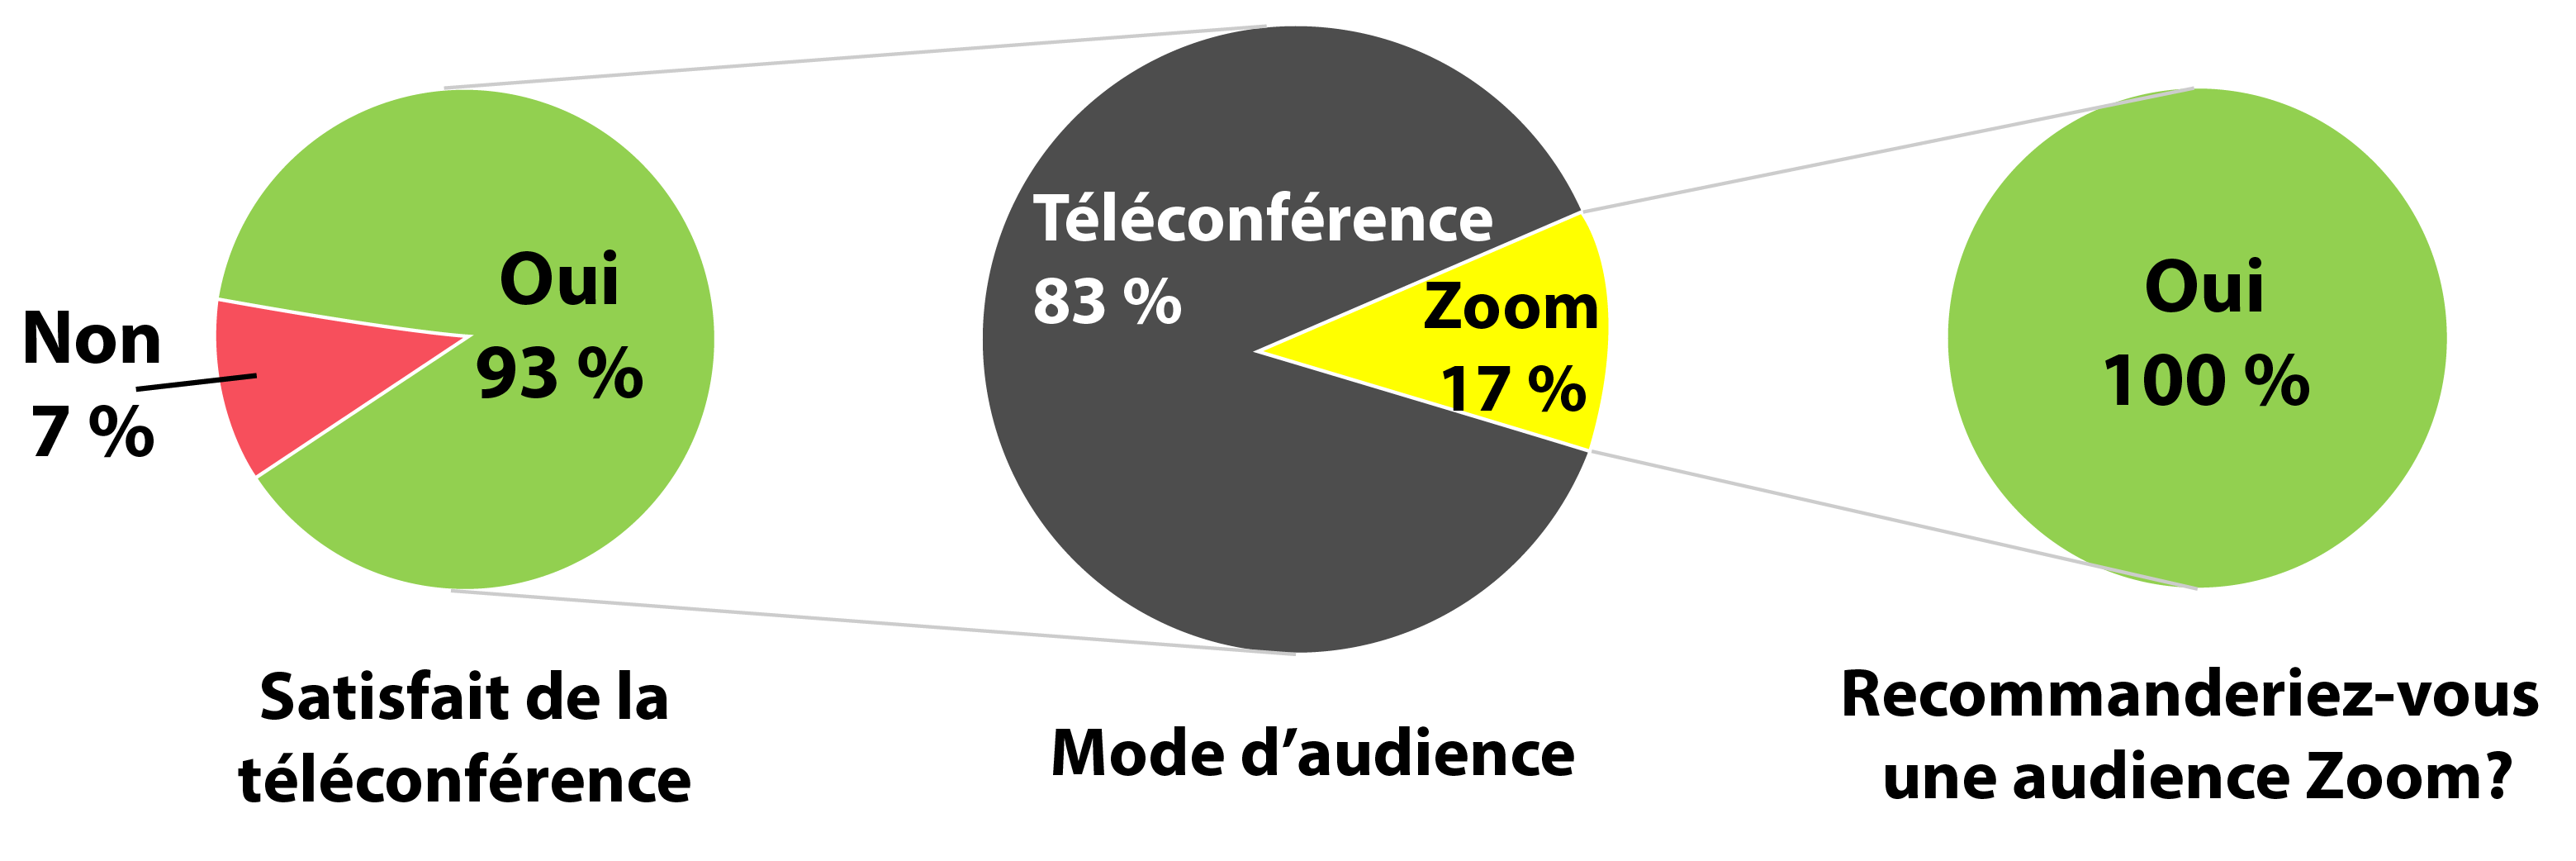 pie chart of teleconference and zoom percentages july-sept2020